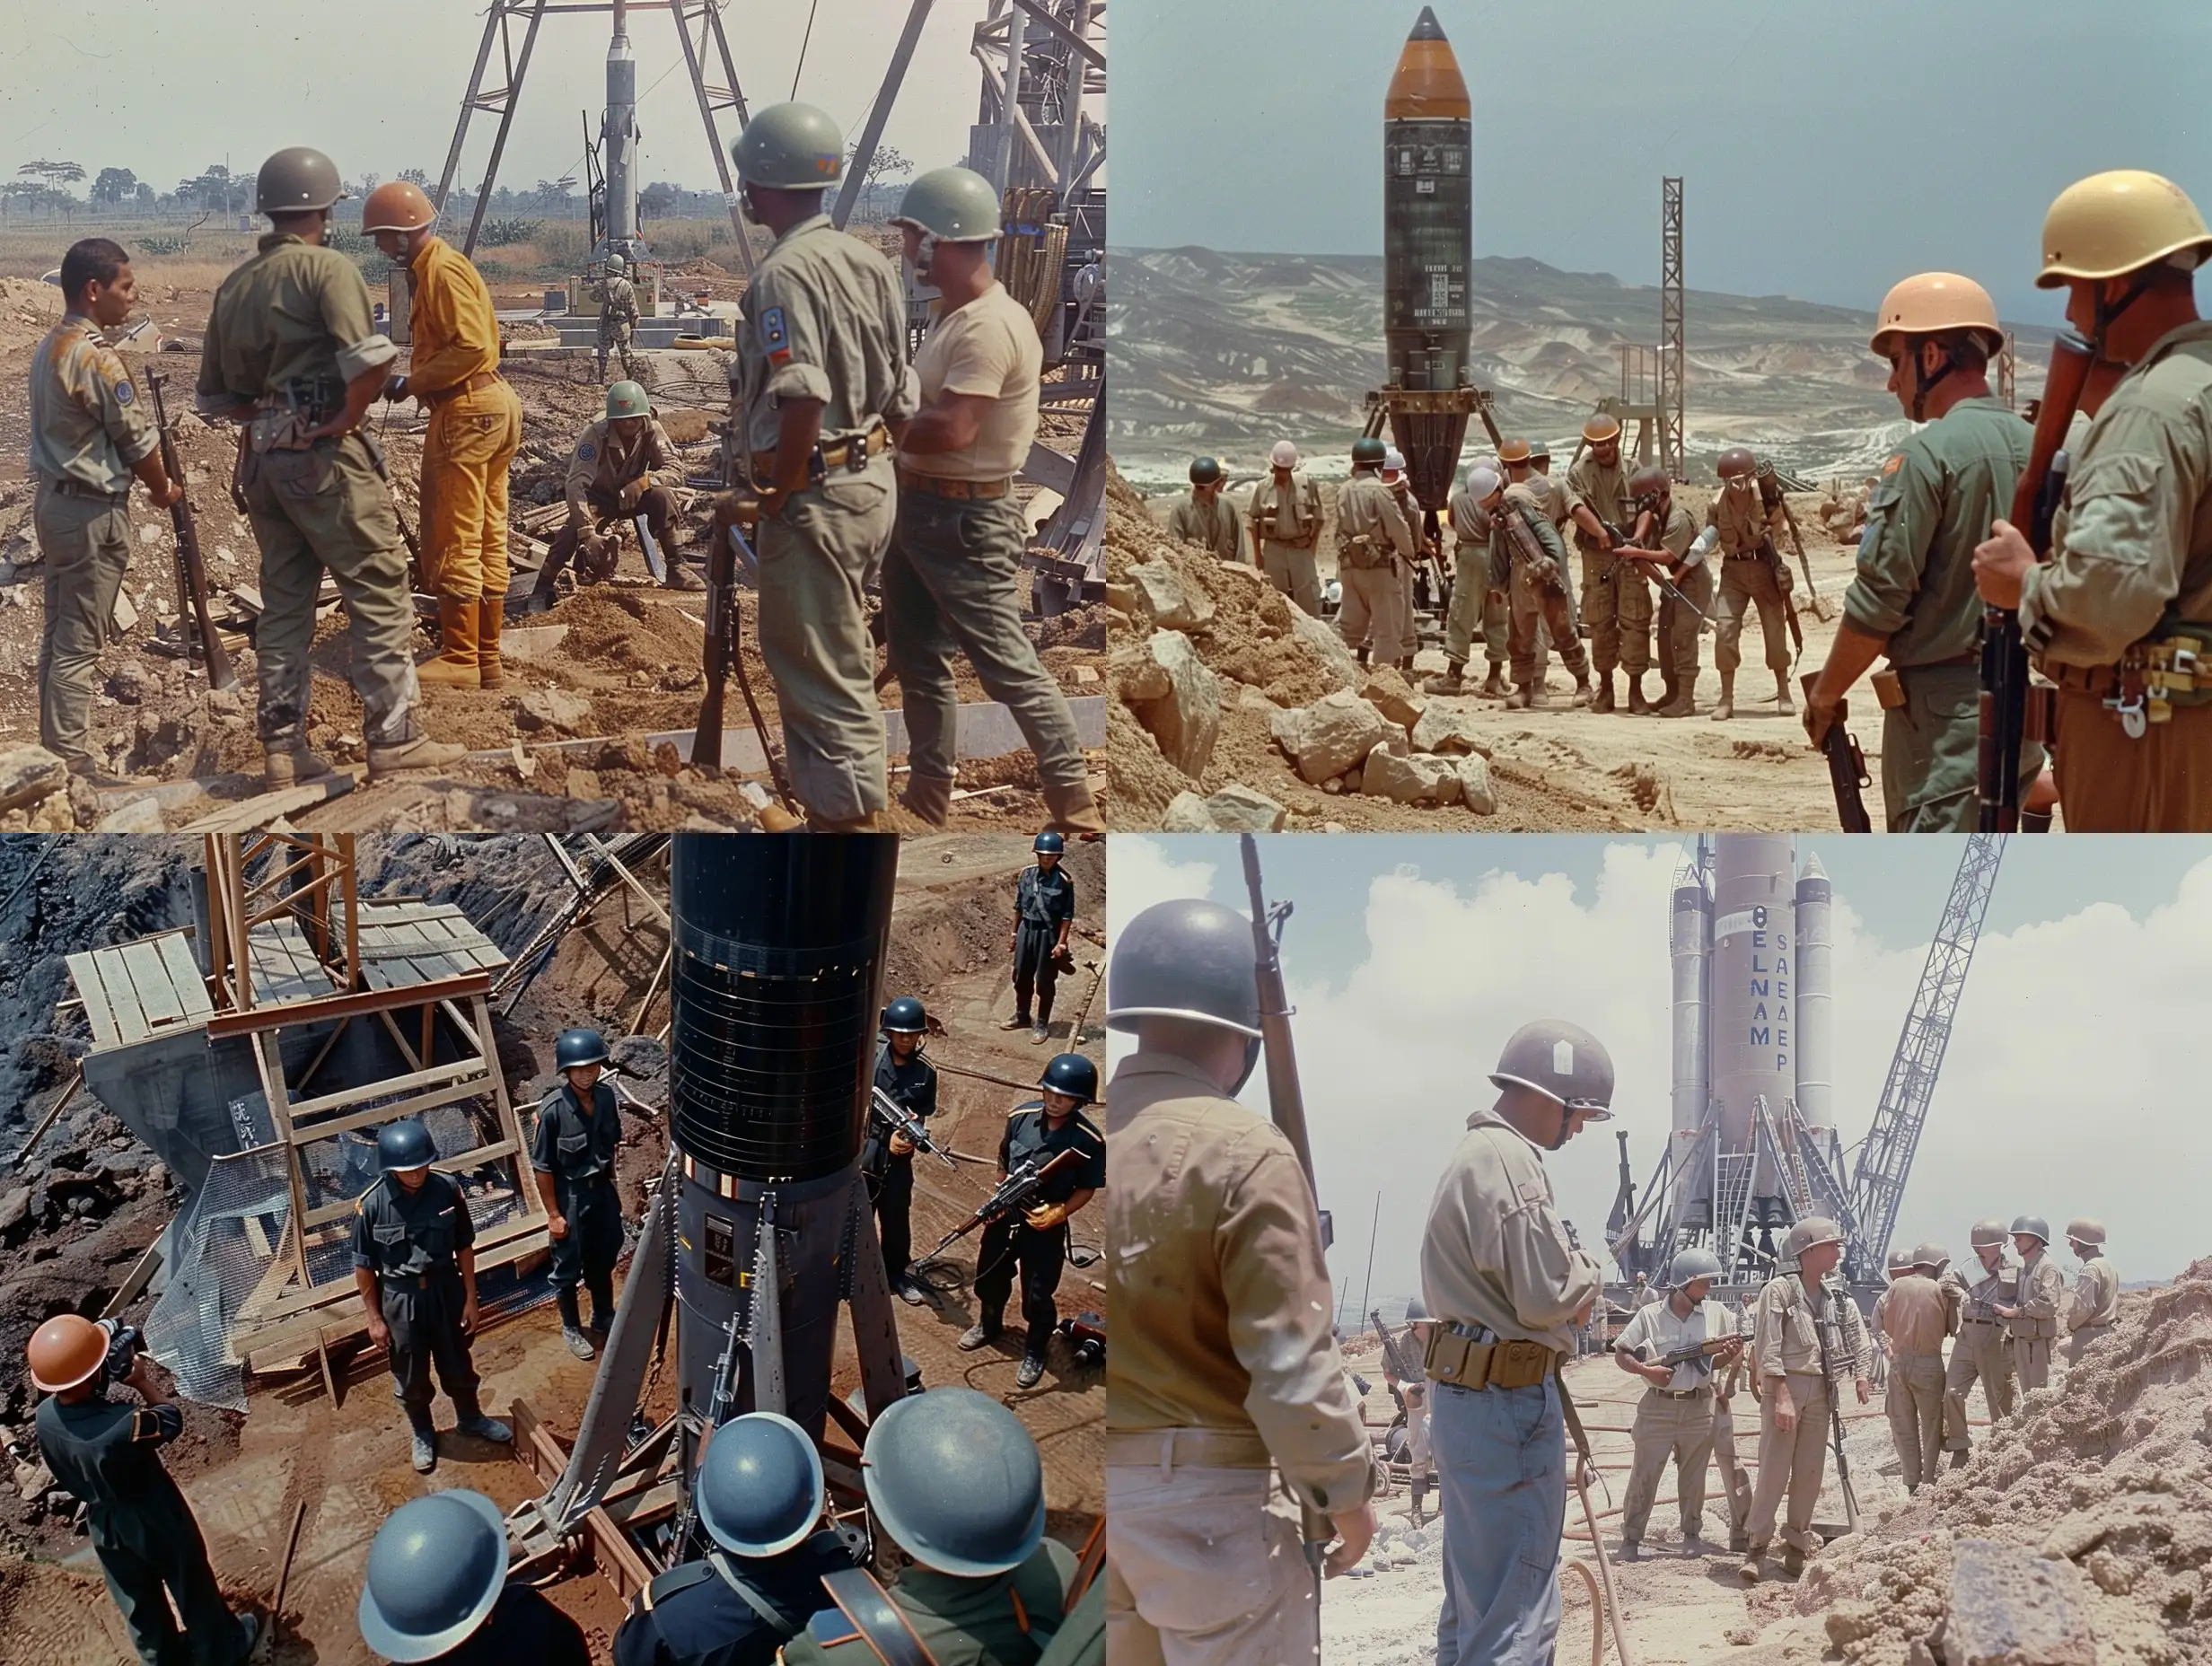 Rocket-Launch-Site-Workers-Supervised-by-Soldiers